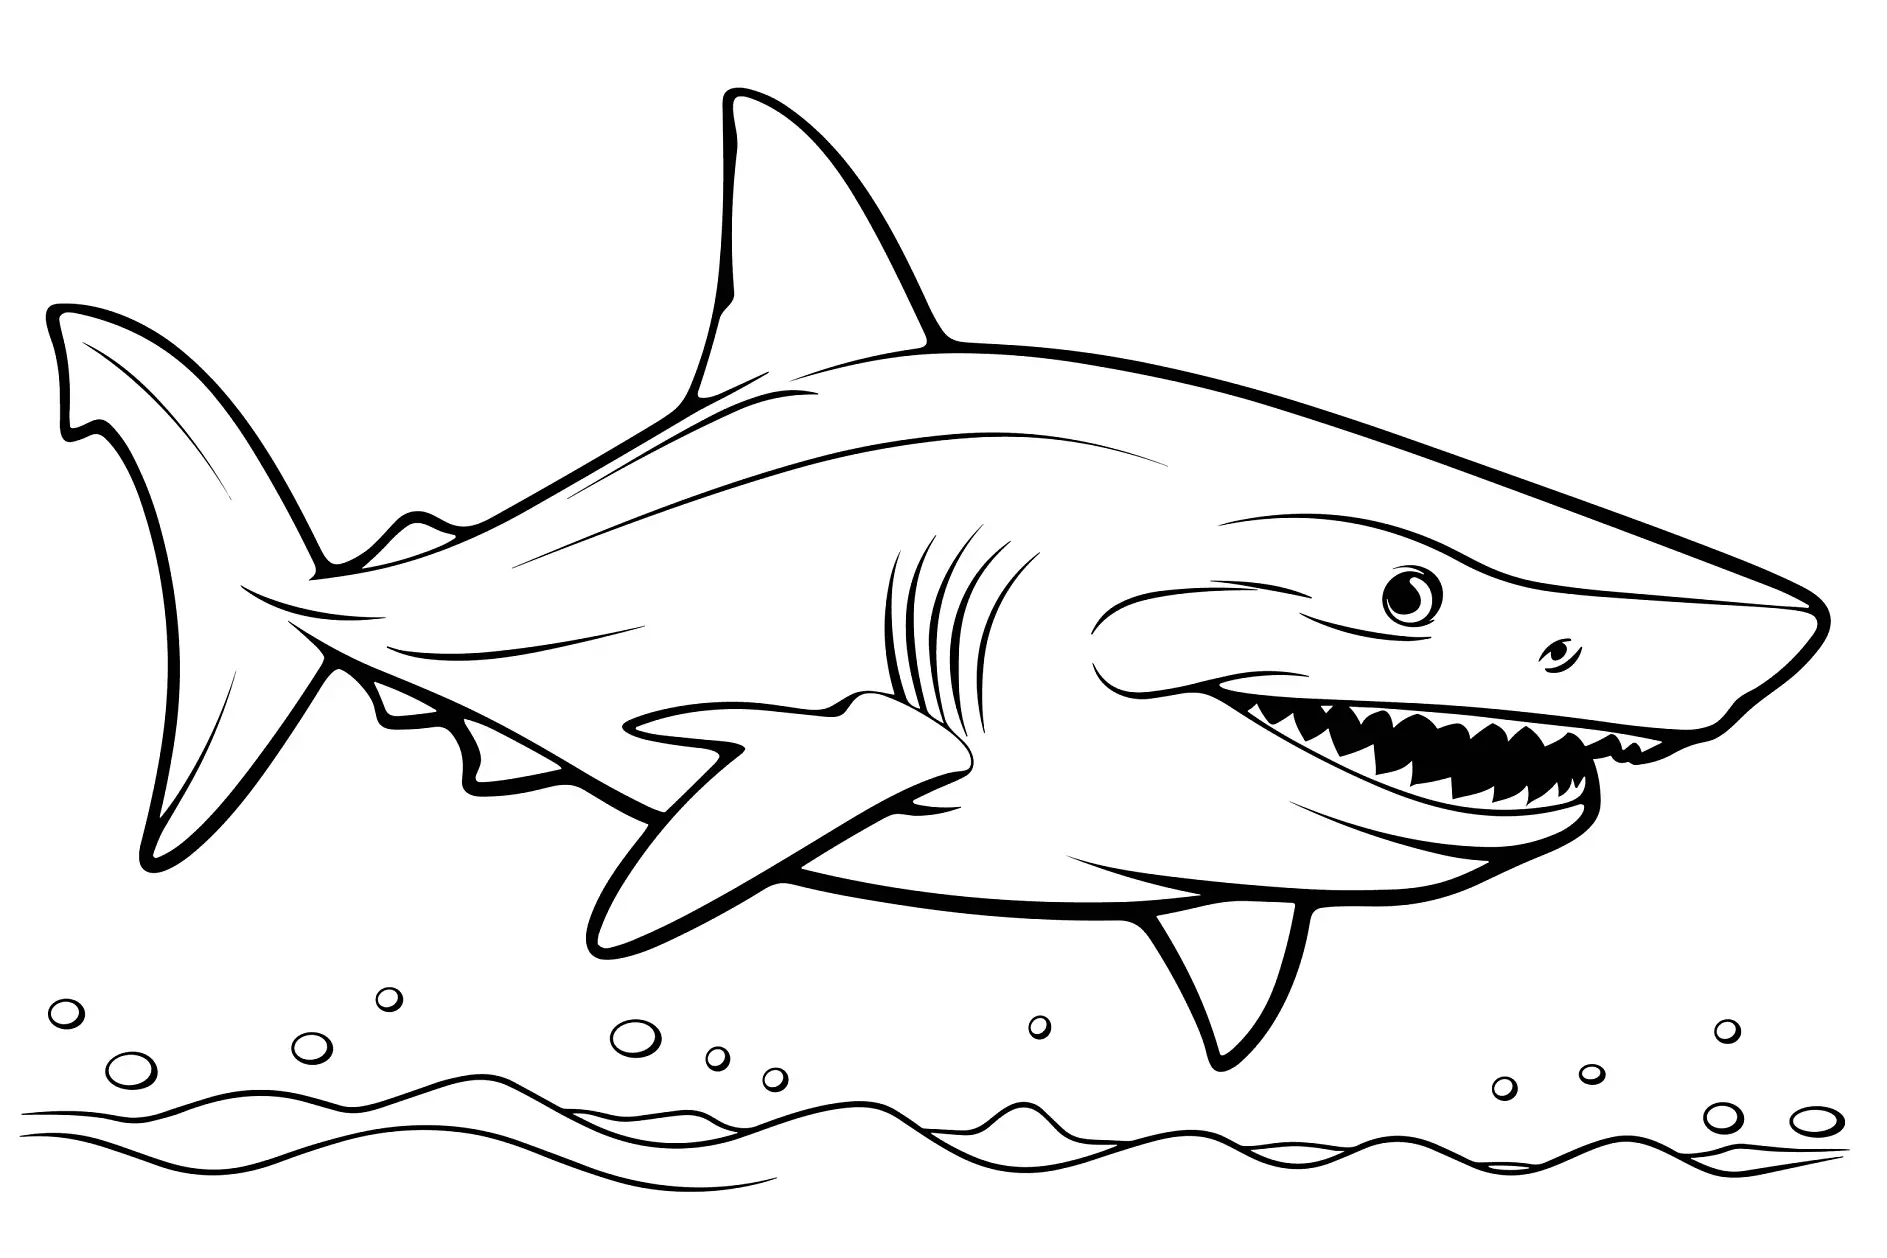 Cute Shark With coloring book pages picture, line art, outline drawing vector illustration